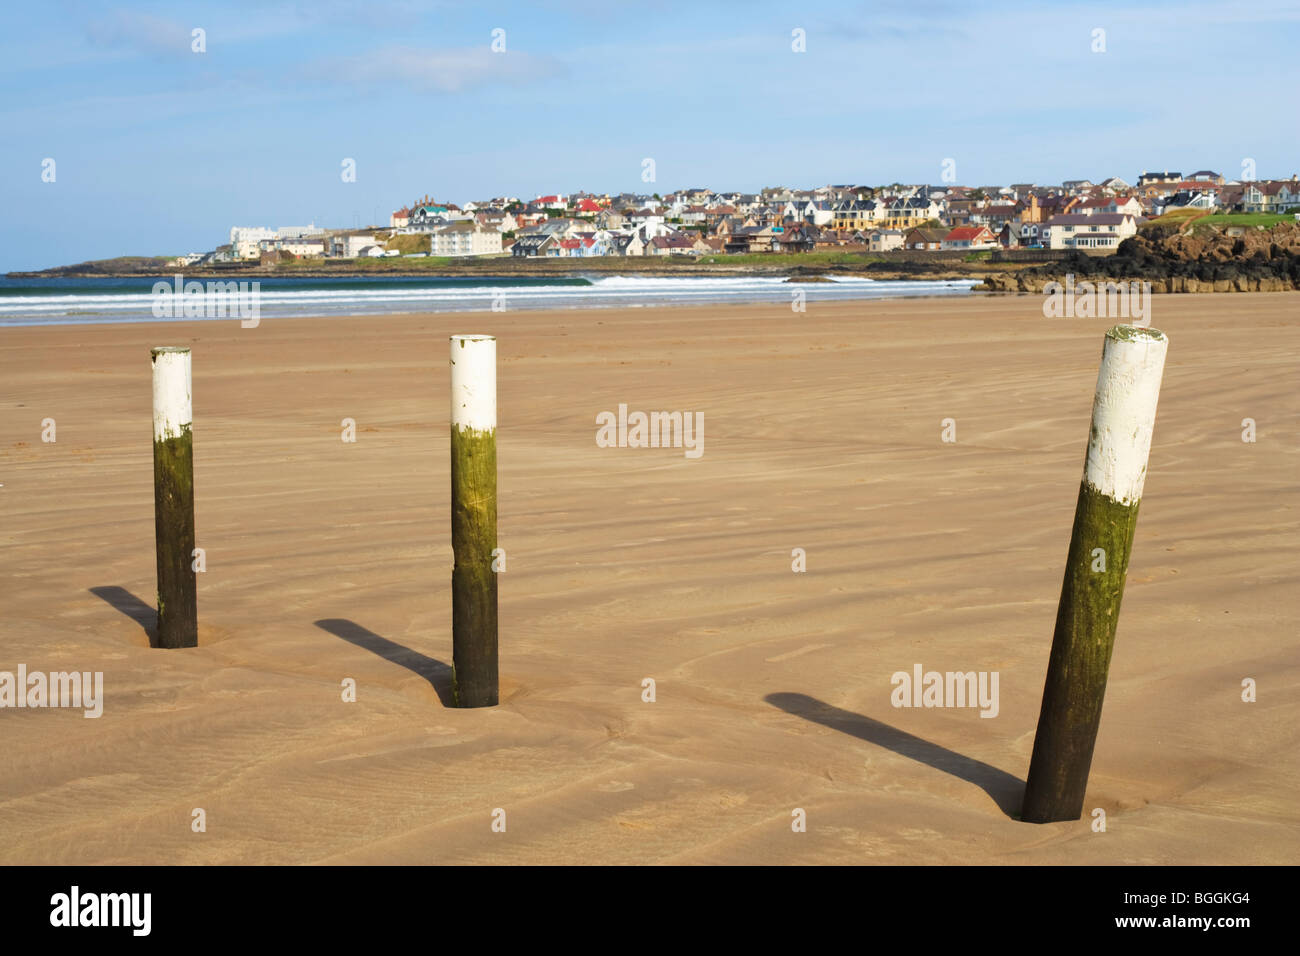 Markers on the beach at Portsteward Strand, a popular resort on the north County Londonderry coast, Northern Ireland Stock Photo